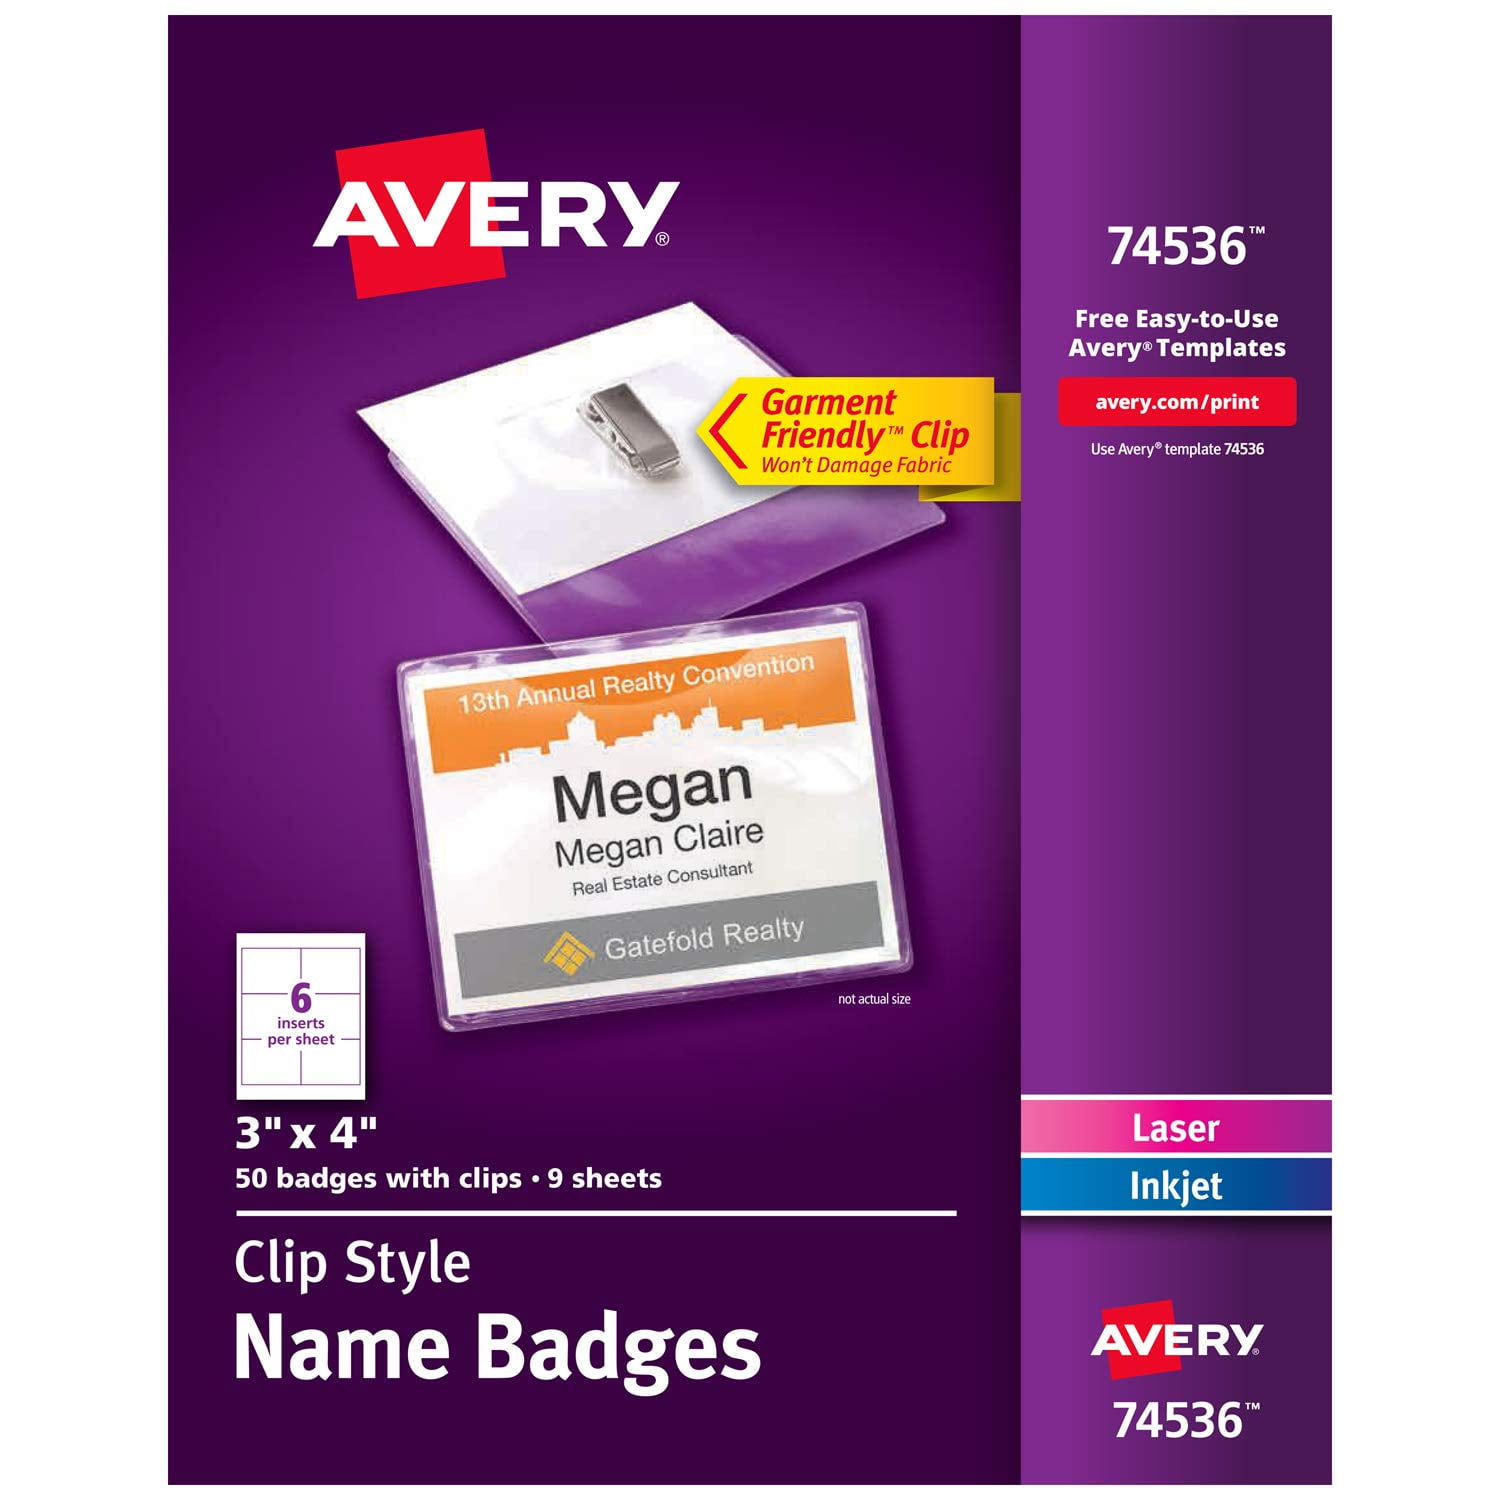 clip-name-badges-print-or-write-3-x-4-50-inserts-badge-holders